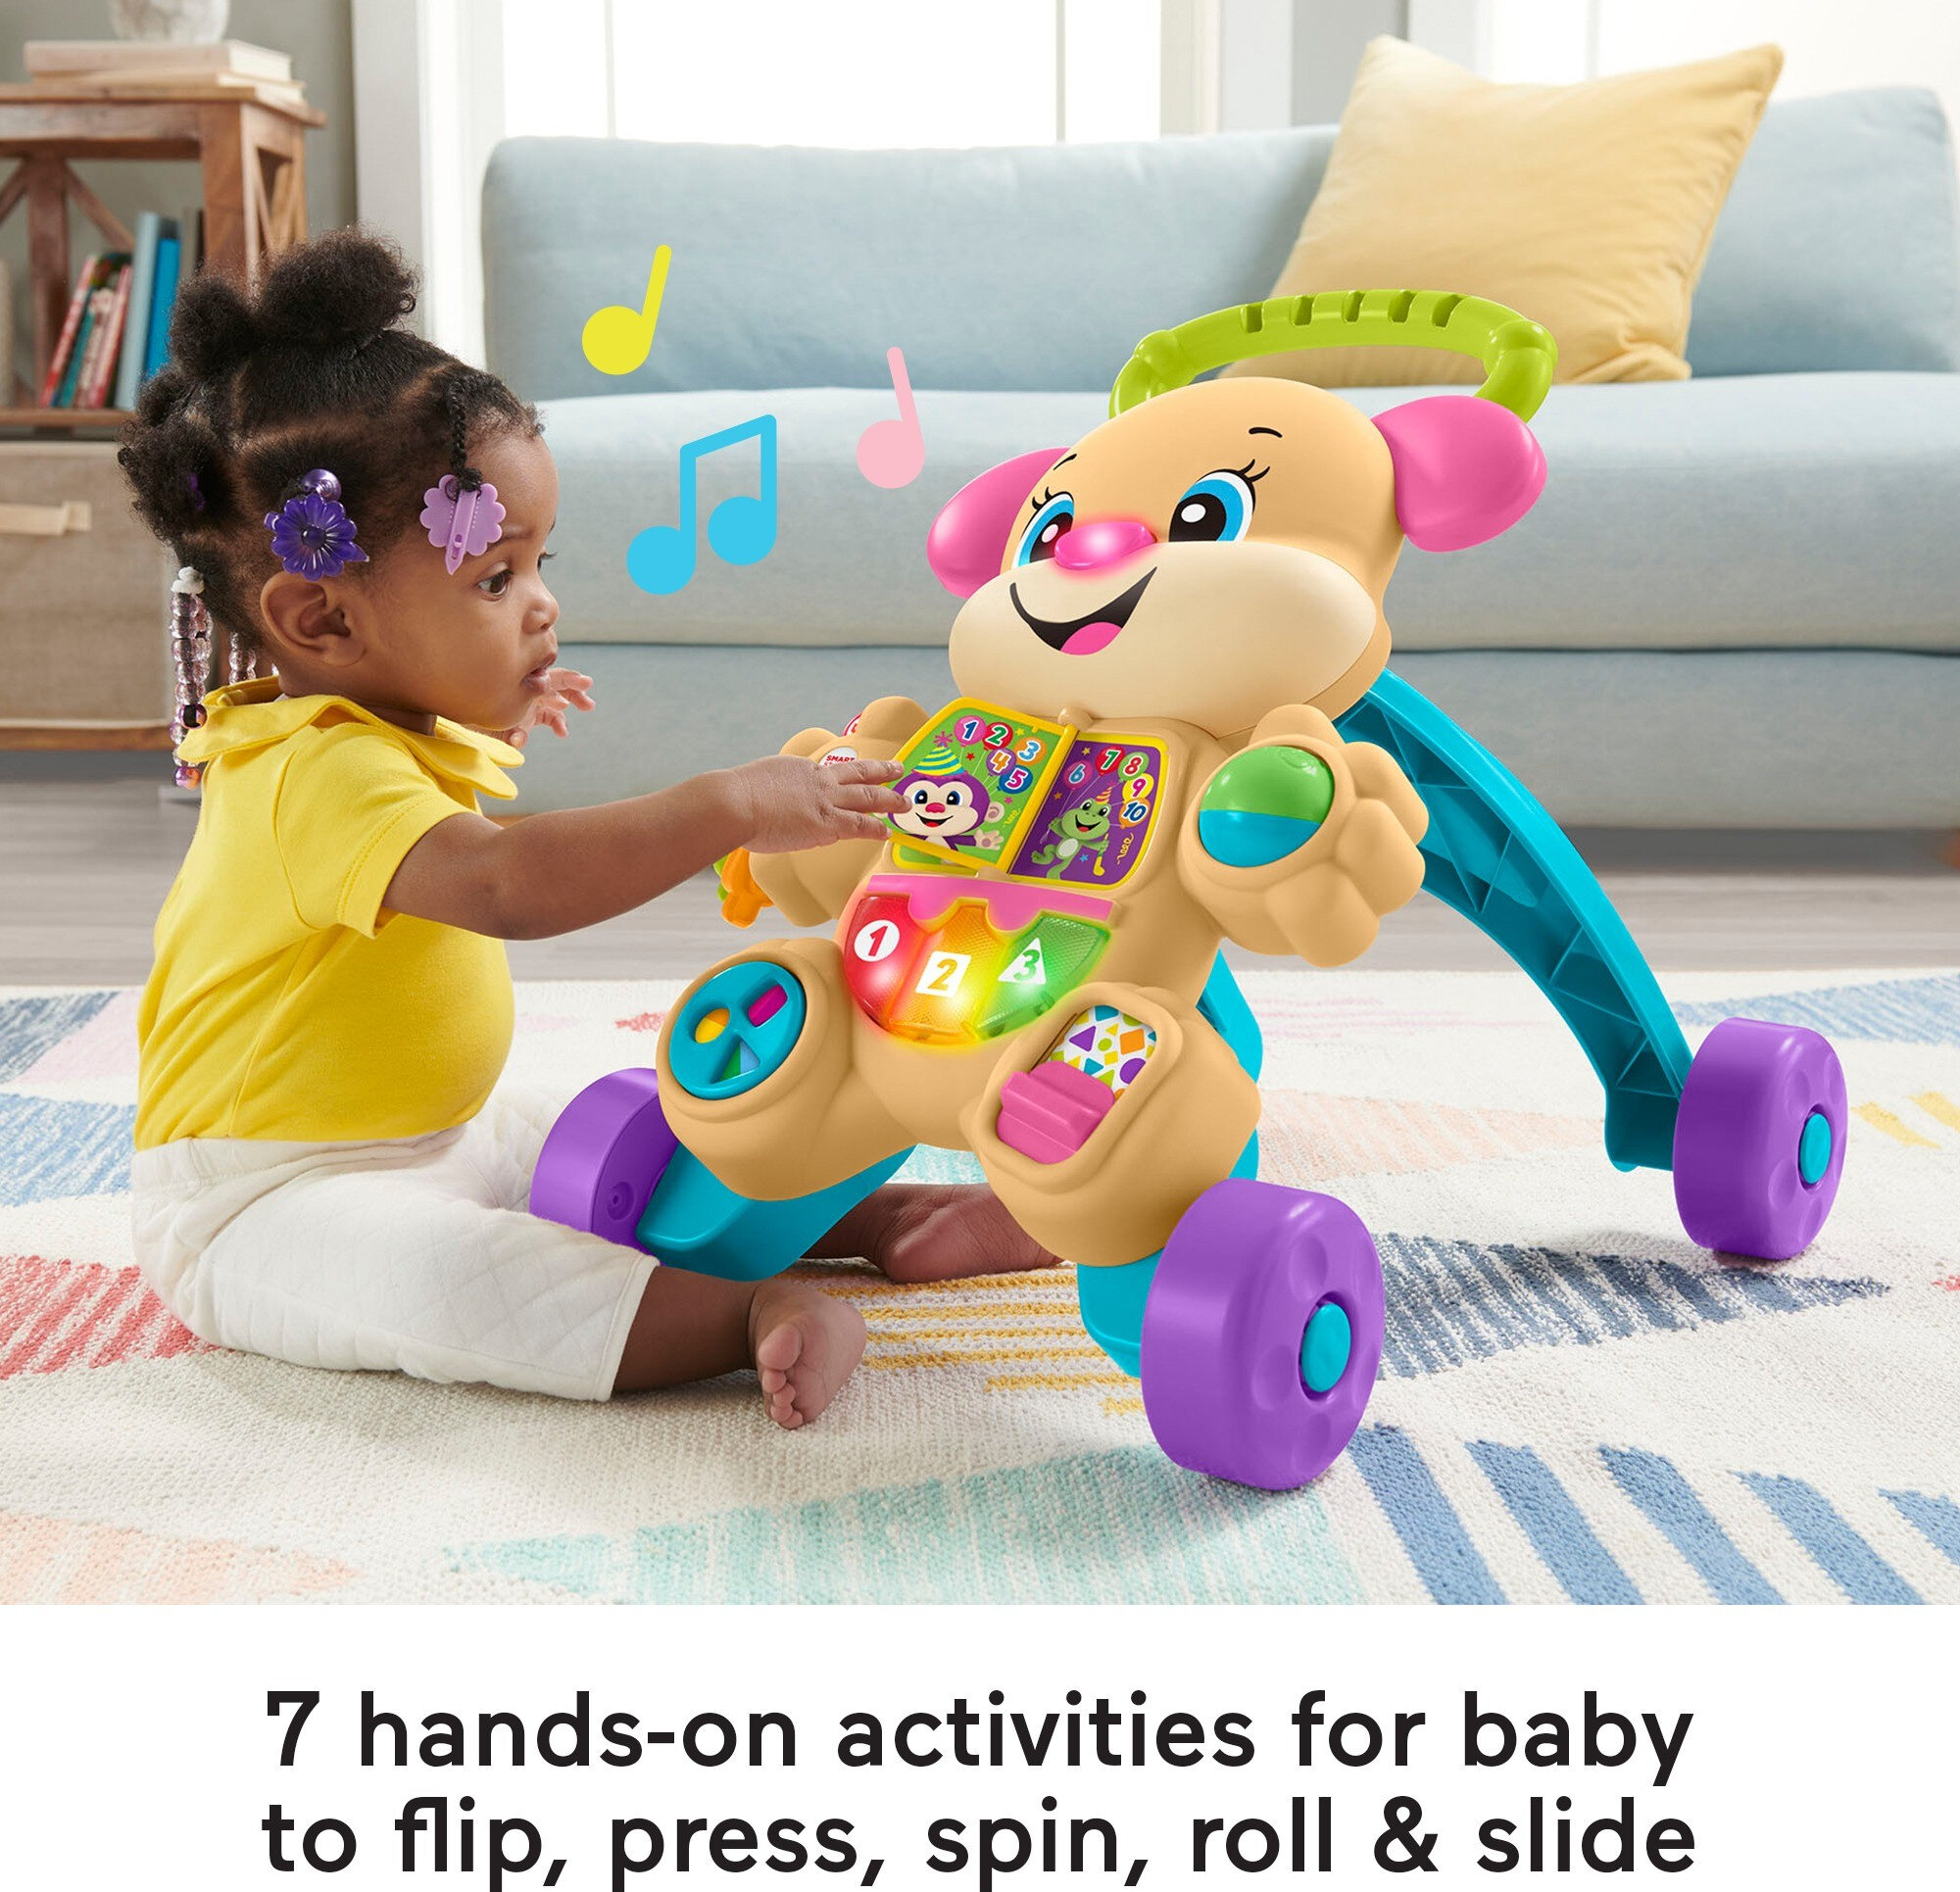 Fisher-Price Laugh & Learn Smart Stages Learn with Sis Walker Baby & Toddler Educational Toy - image 5 of 8